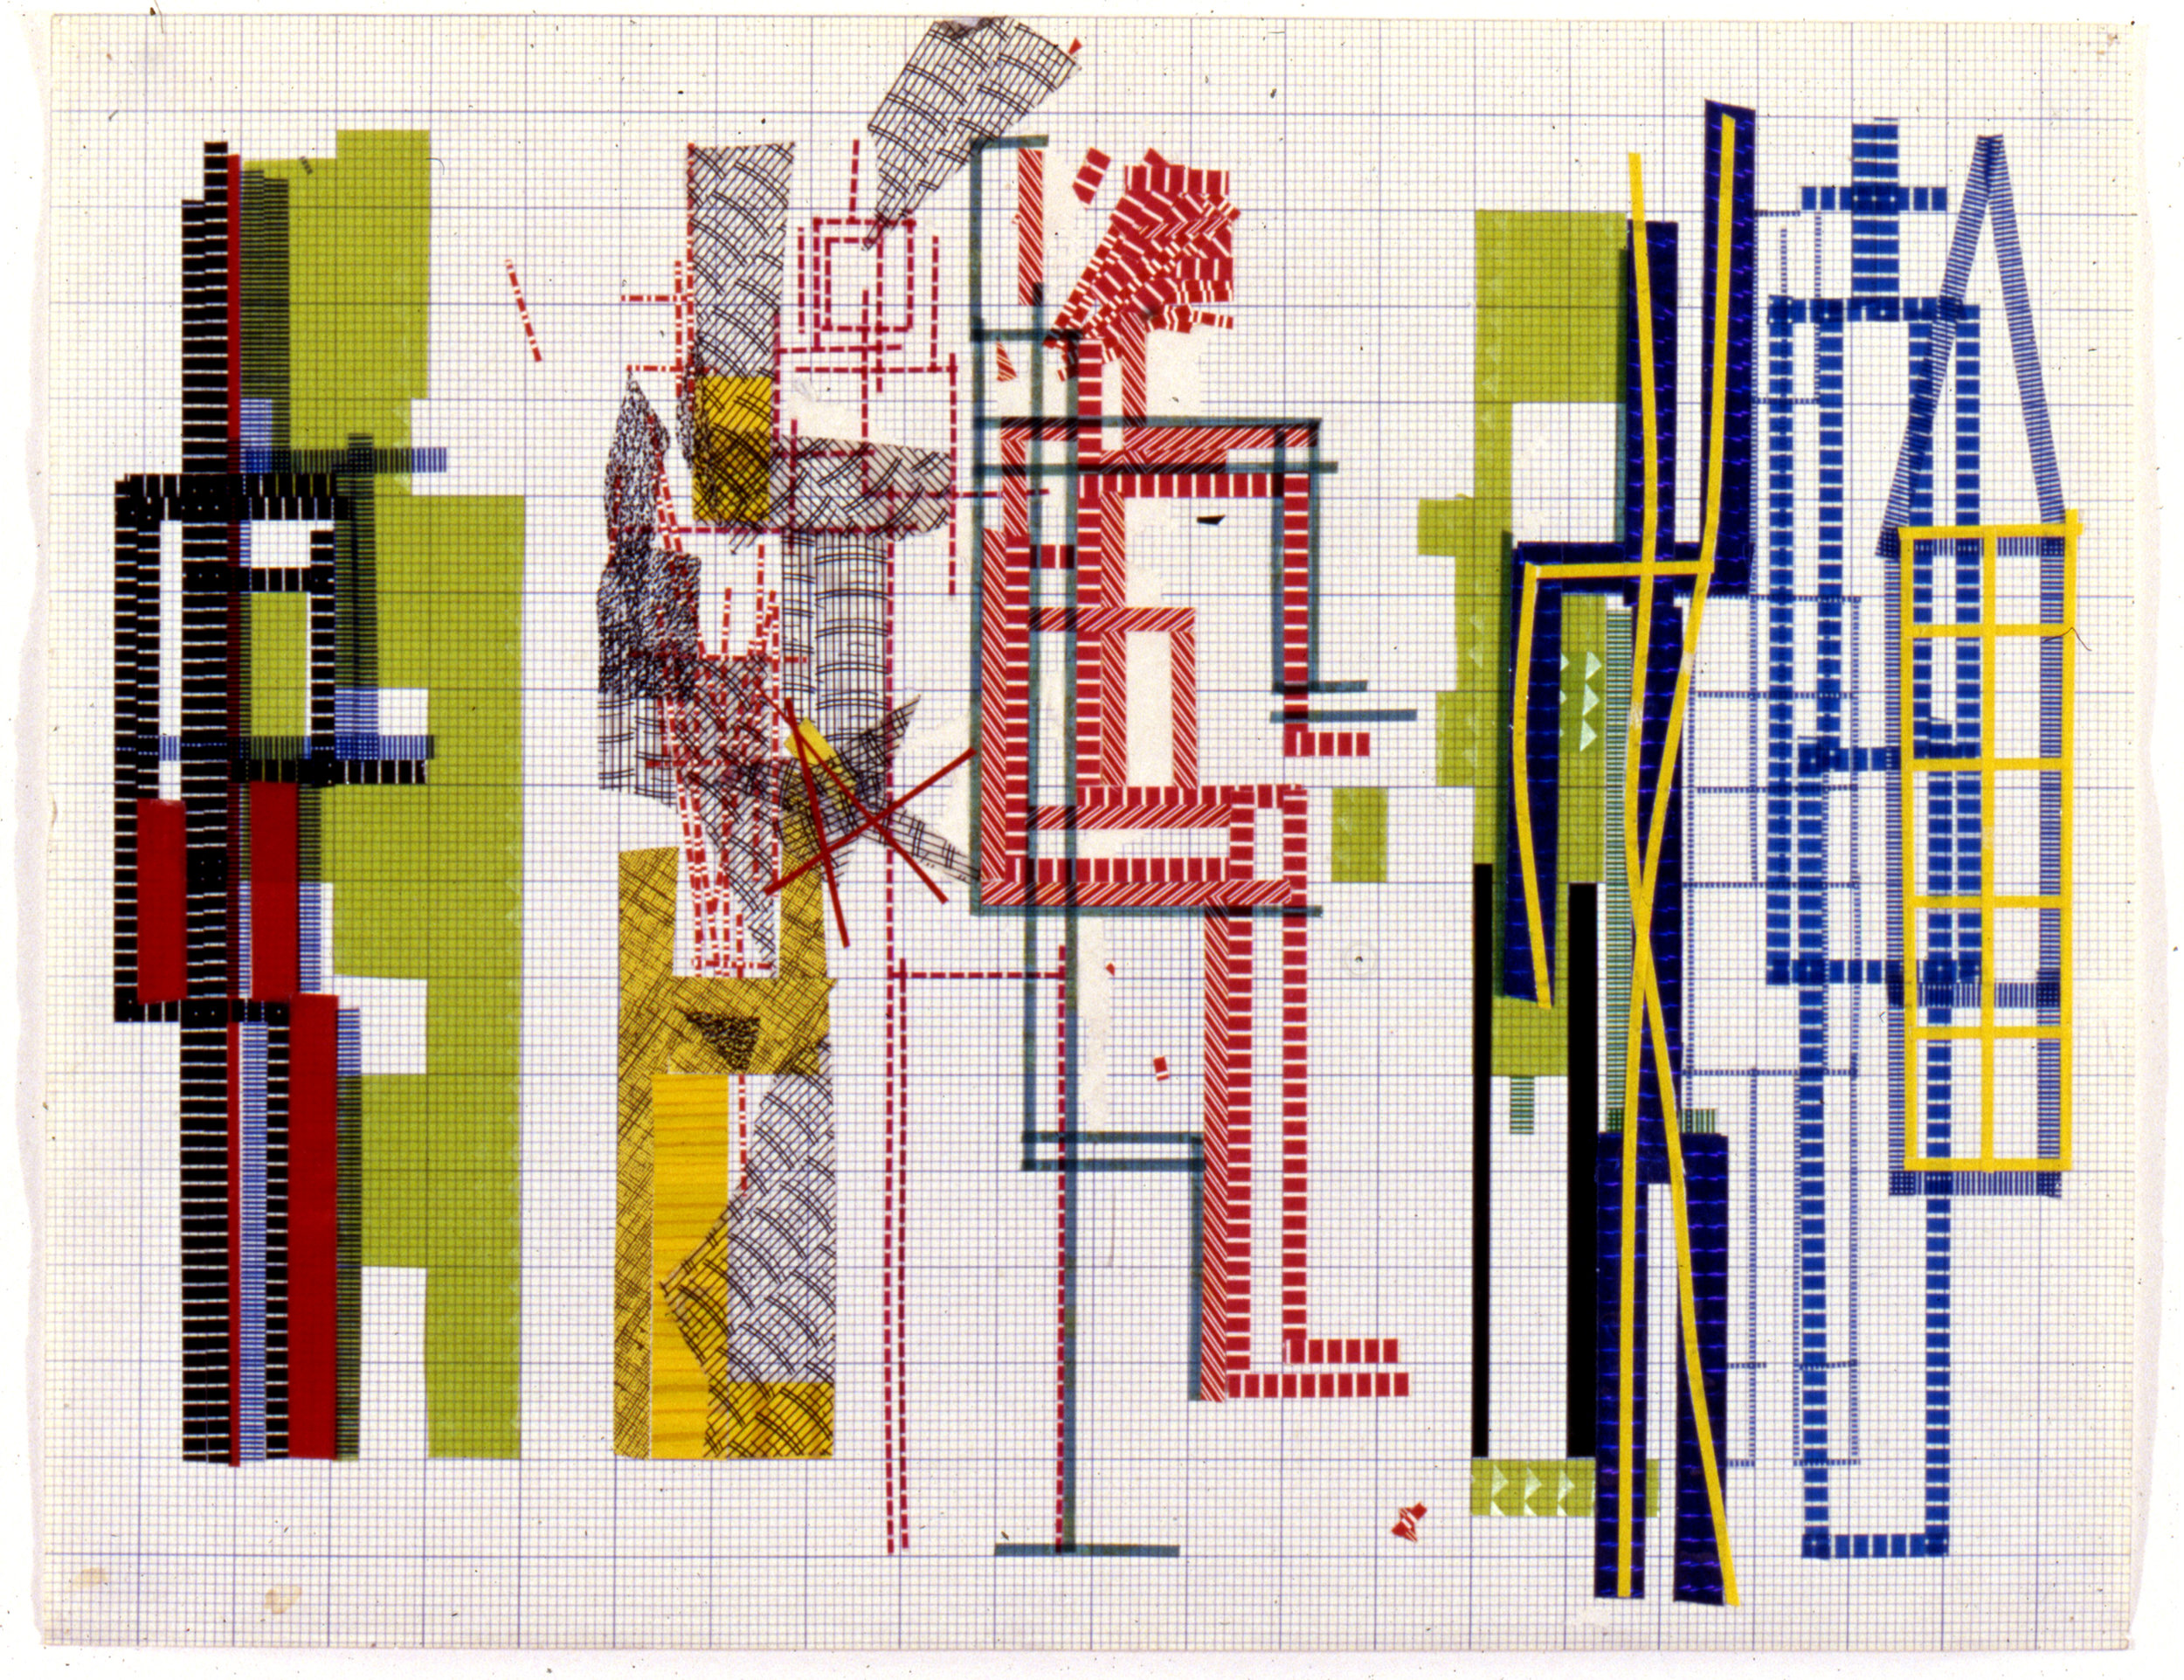 Drawing for Prototypes, 1979